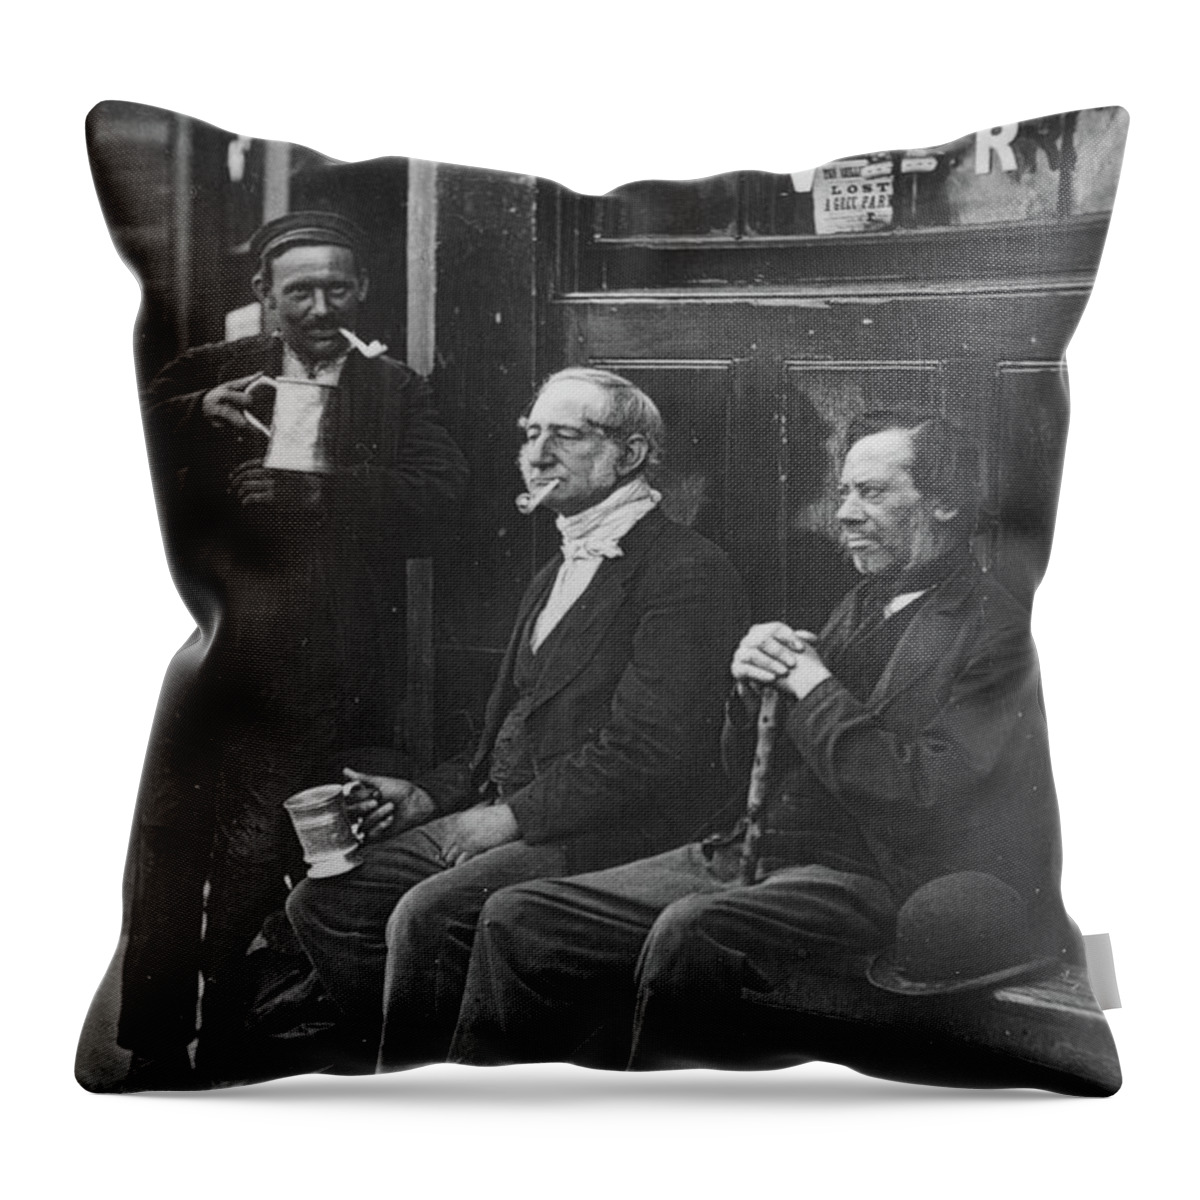 19th Century Throw Pillow featuring the photograph Wall Workers, C.1877 by John Thomson